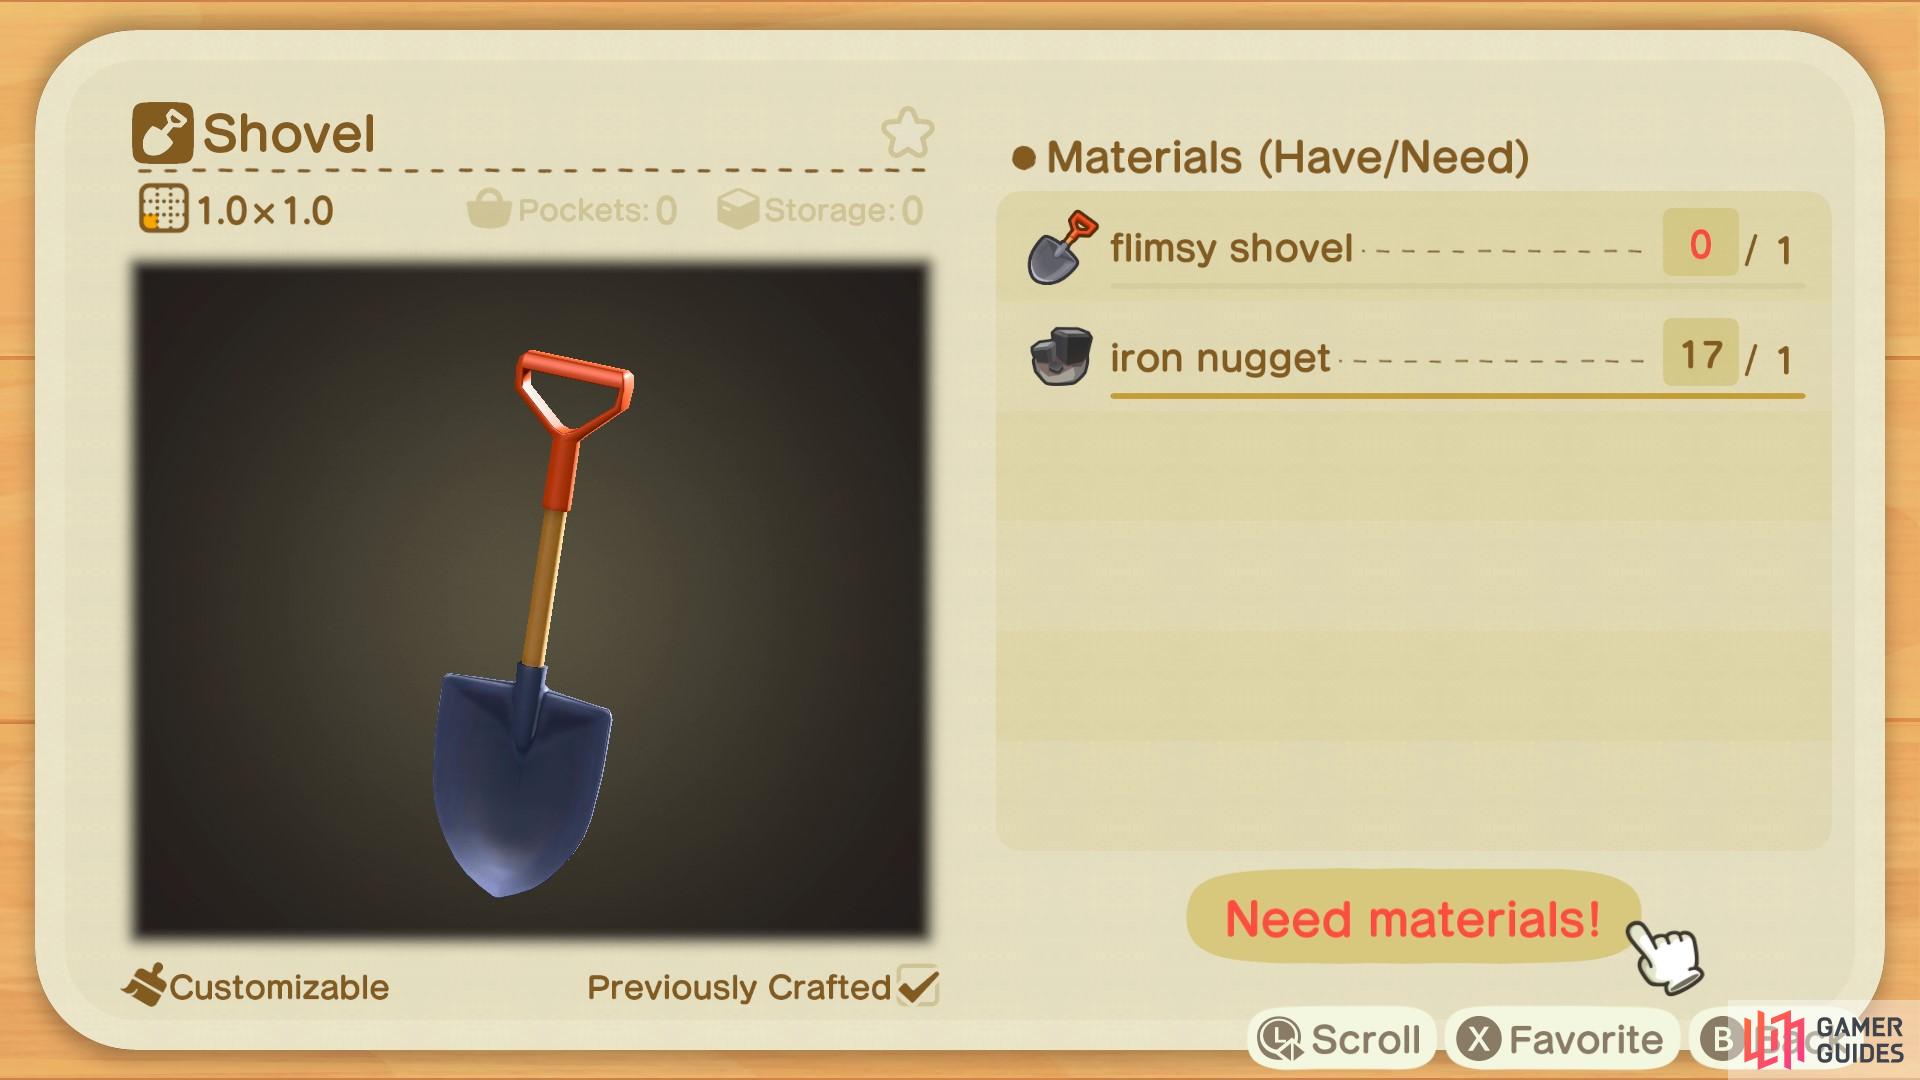 This Shovel is more durable than the Flimsy Shovel.